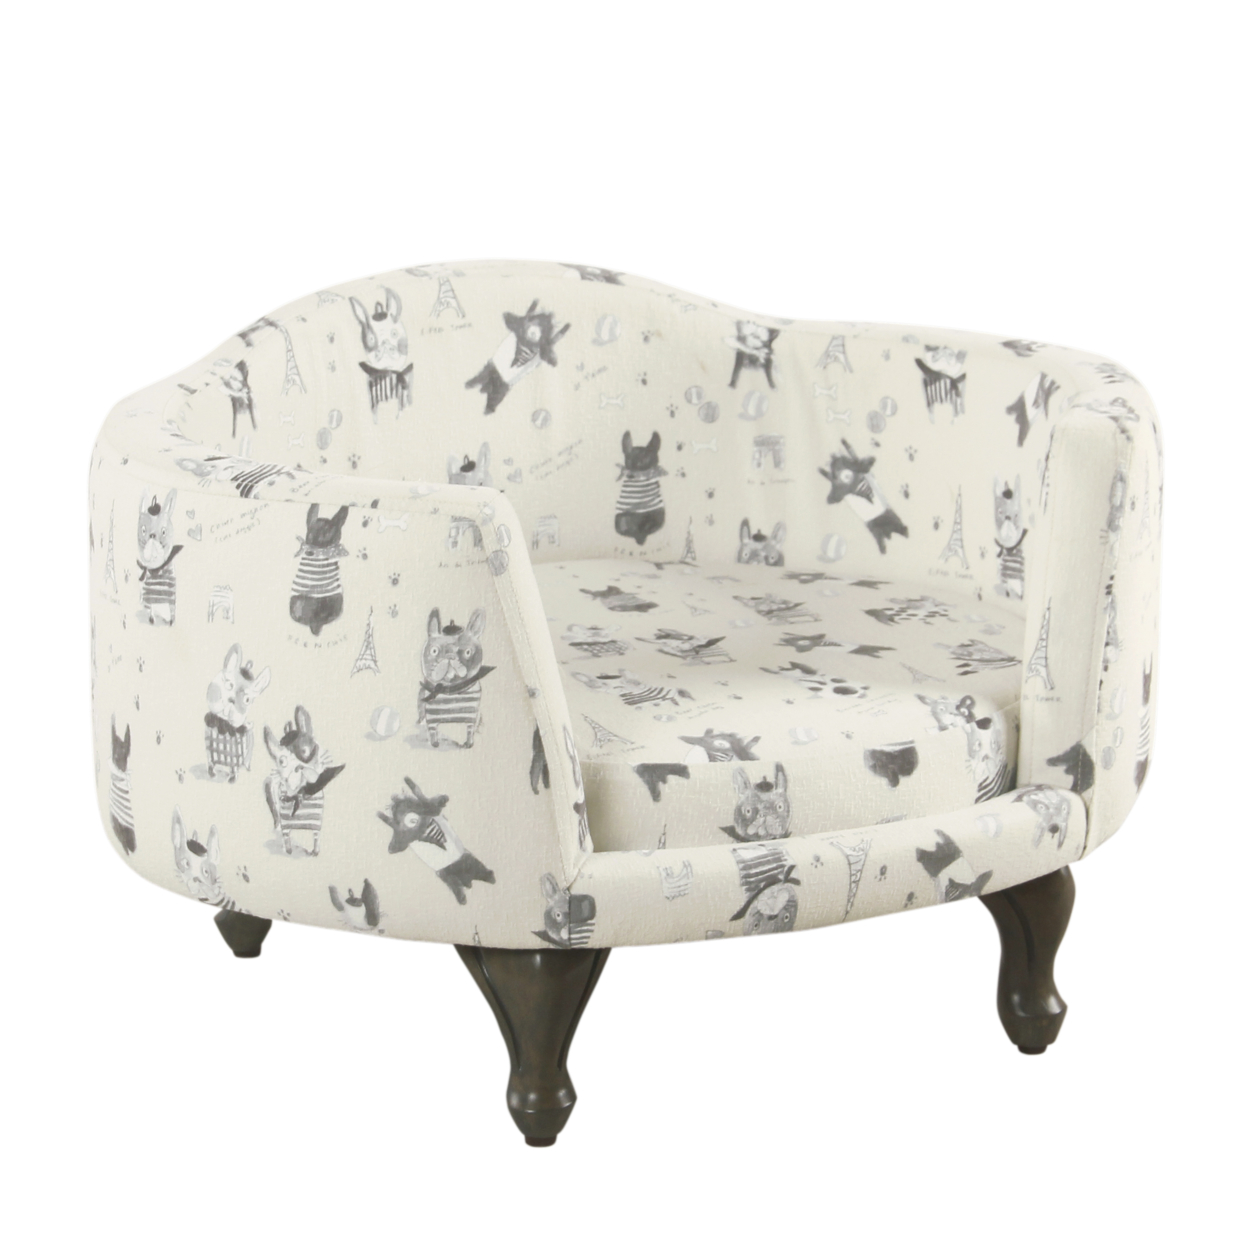 Wooden Pet Bed With French Bulldog Print Fabric Upholstery, Cream And Gray- Saltoro Sherpi